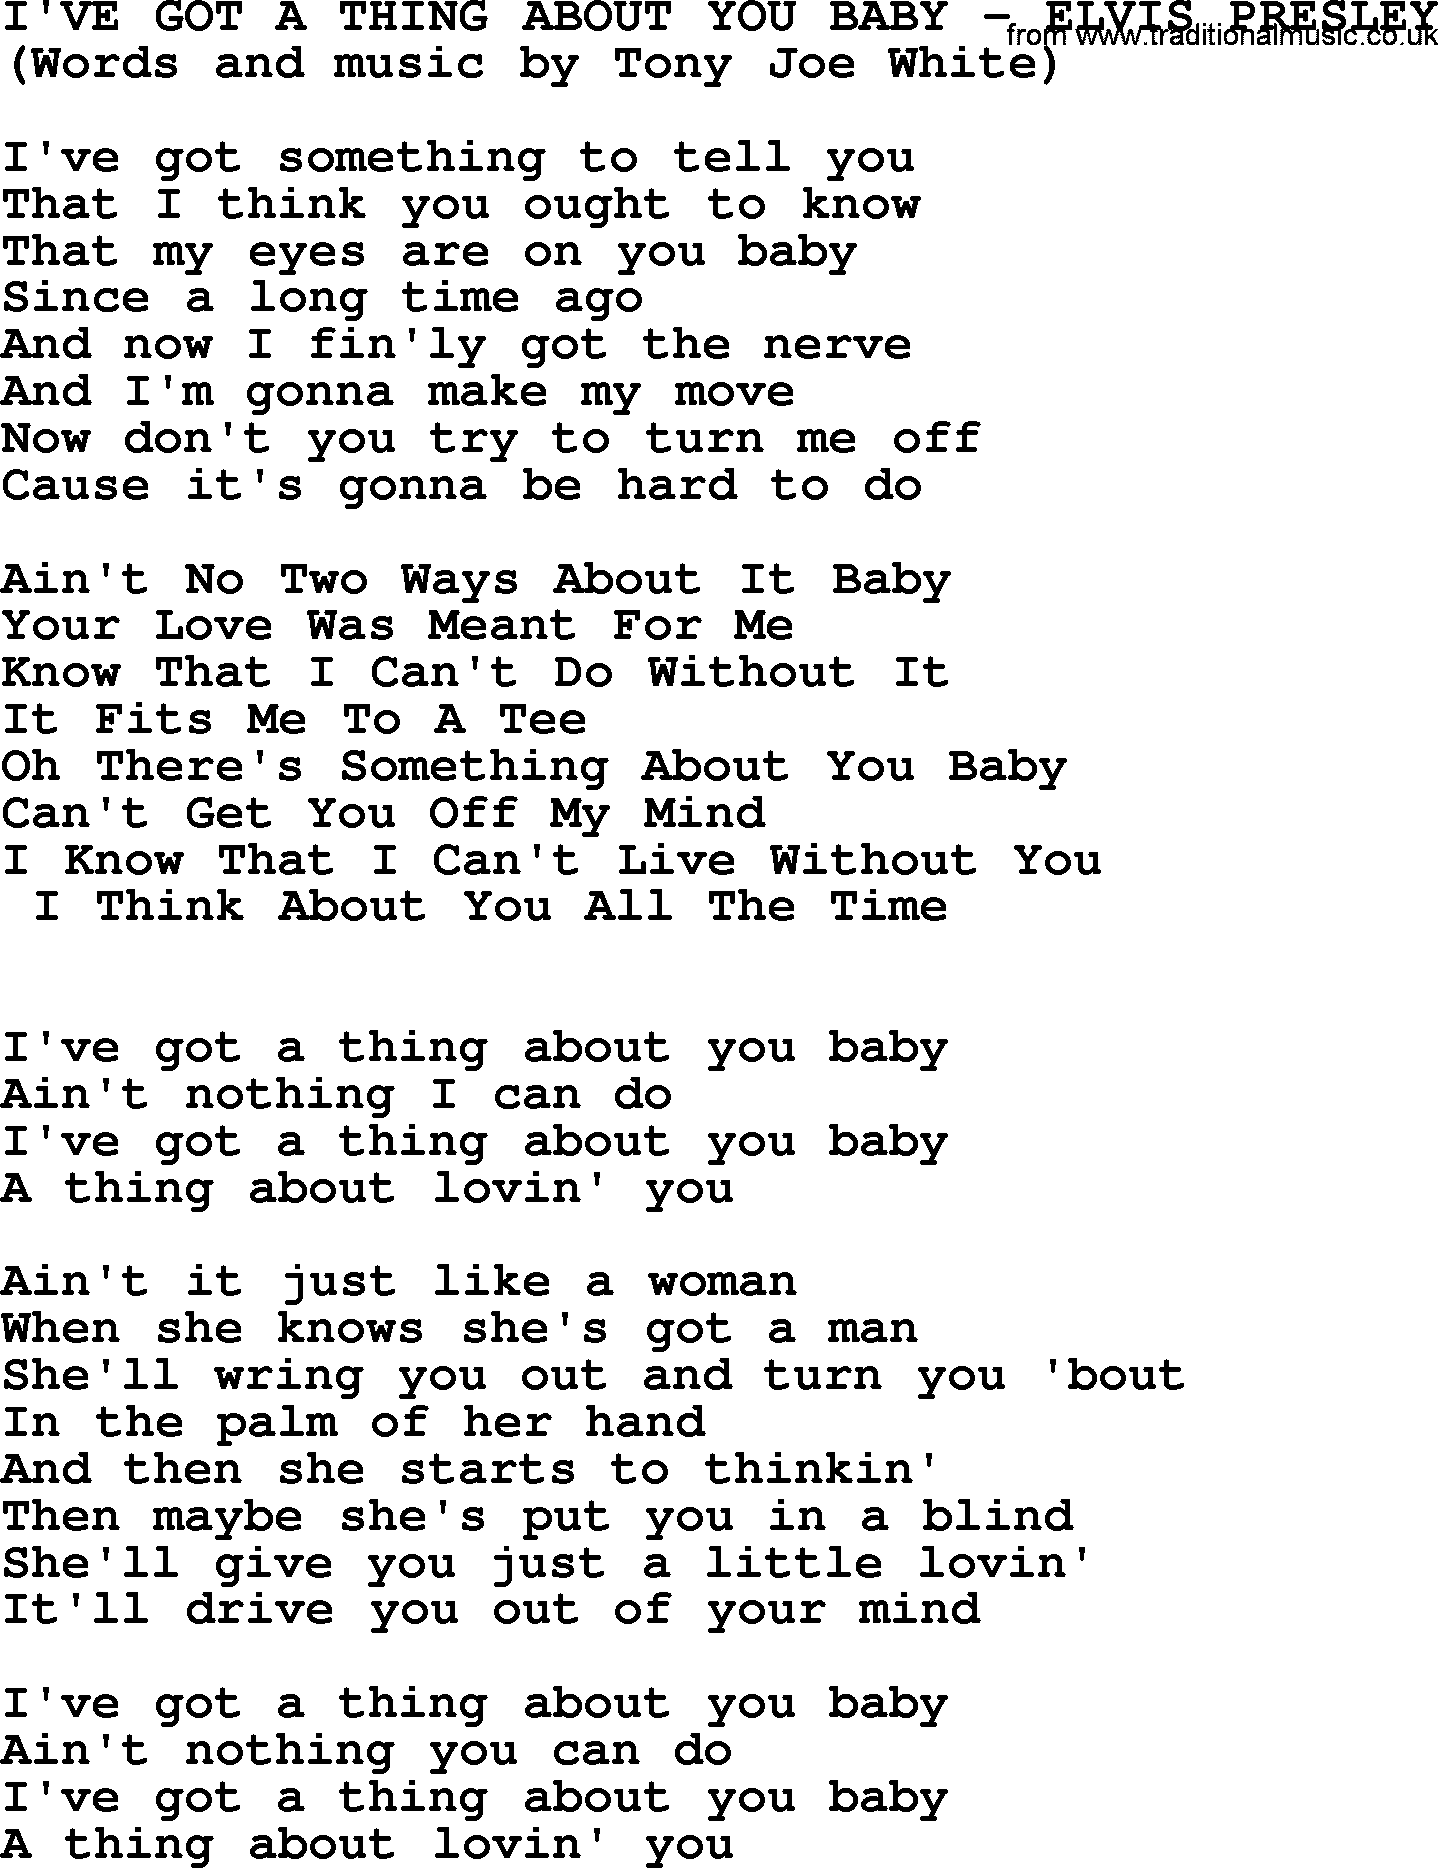 Elvis Presley song: I've Got A Thing About You Baby lyrics